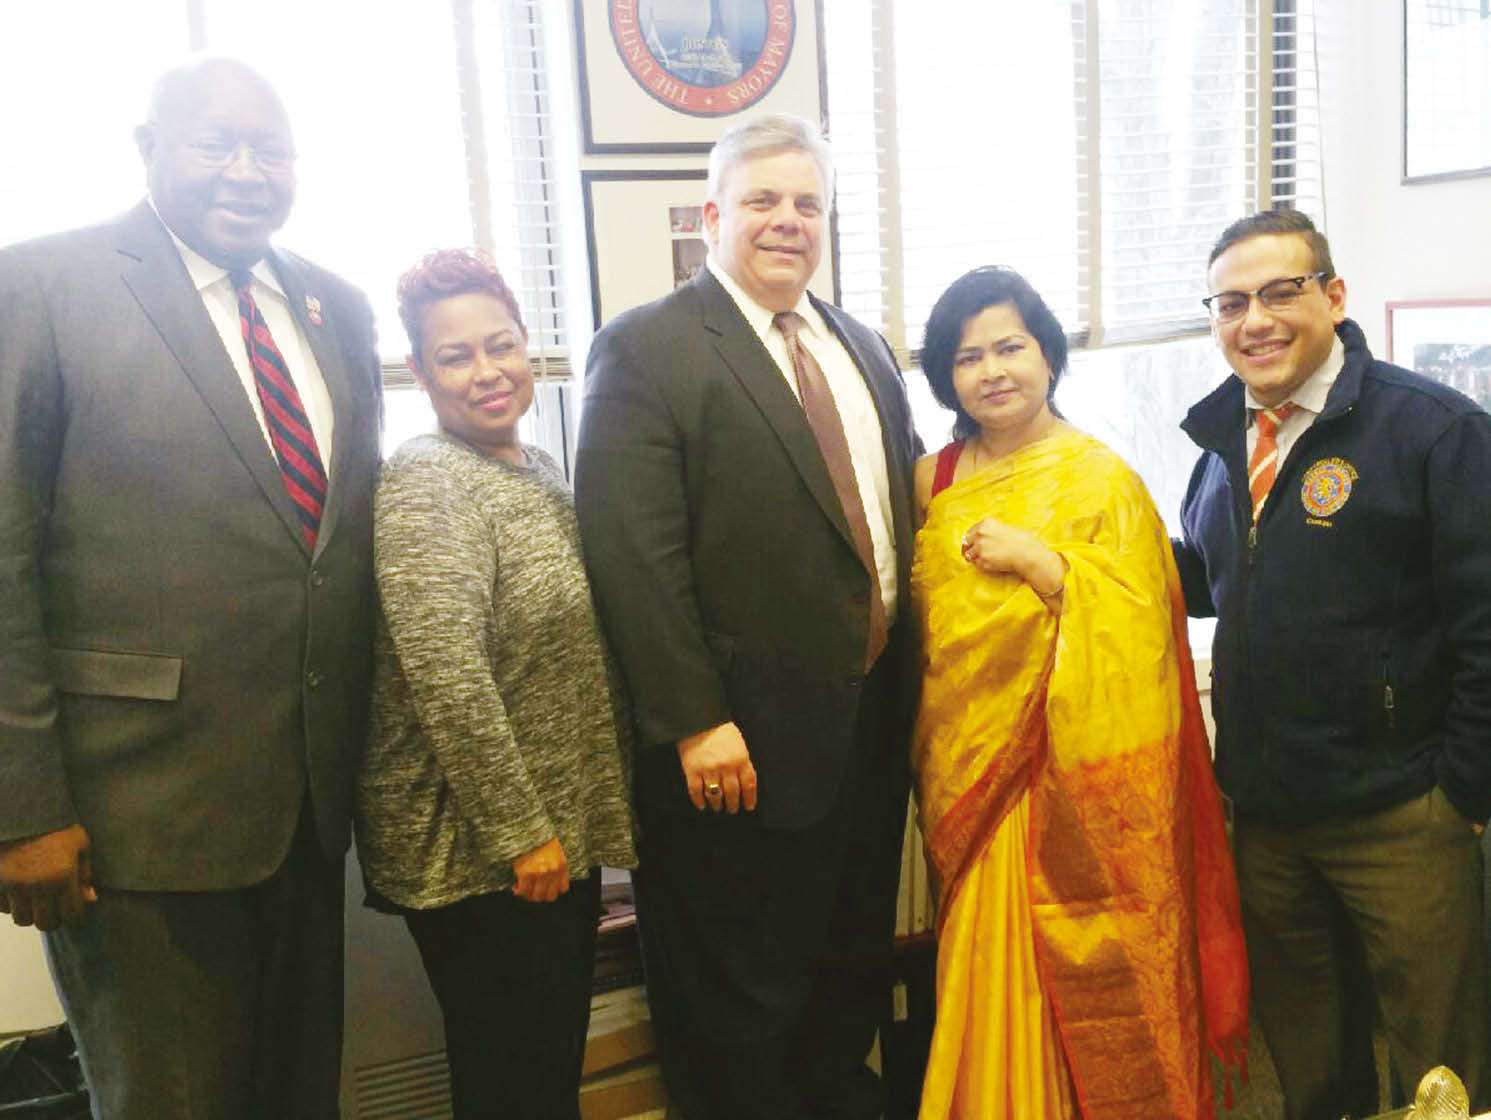 Newly Appointed MWBE Advisory Council Member Ragini Srivastava (third from left) with (L to R): Chief Deputy Comptroller James Garner, Deputy Comptroller Ray Averna, and Counsel Sergio Blanco.